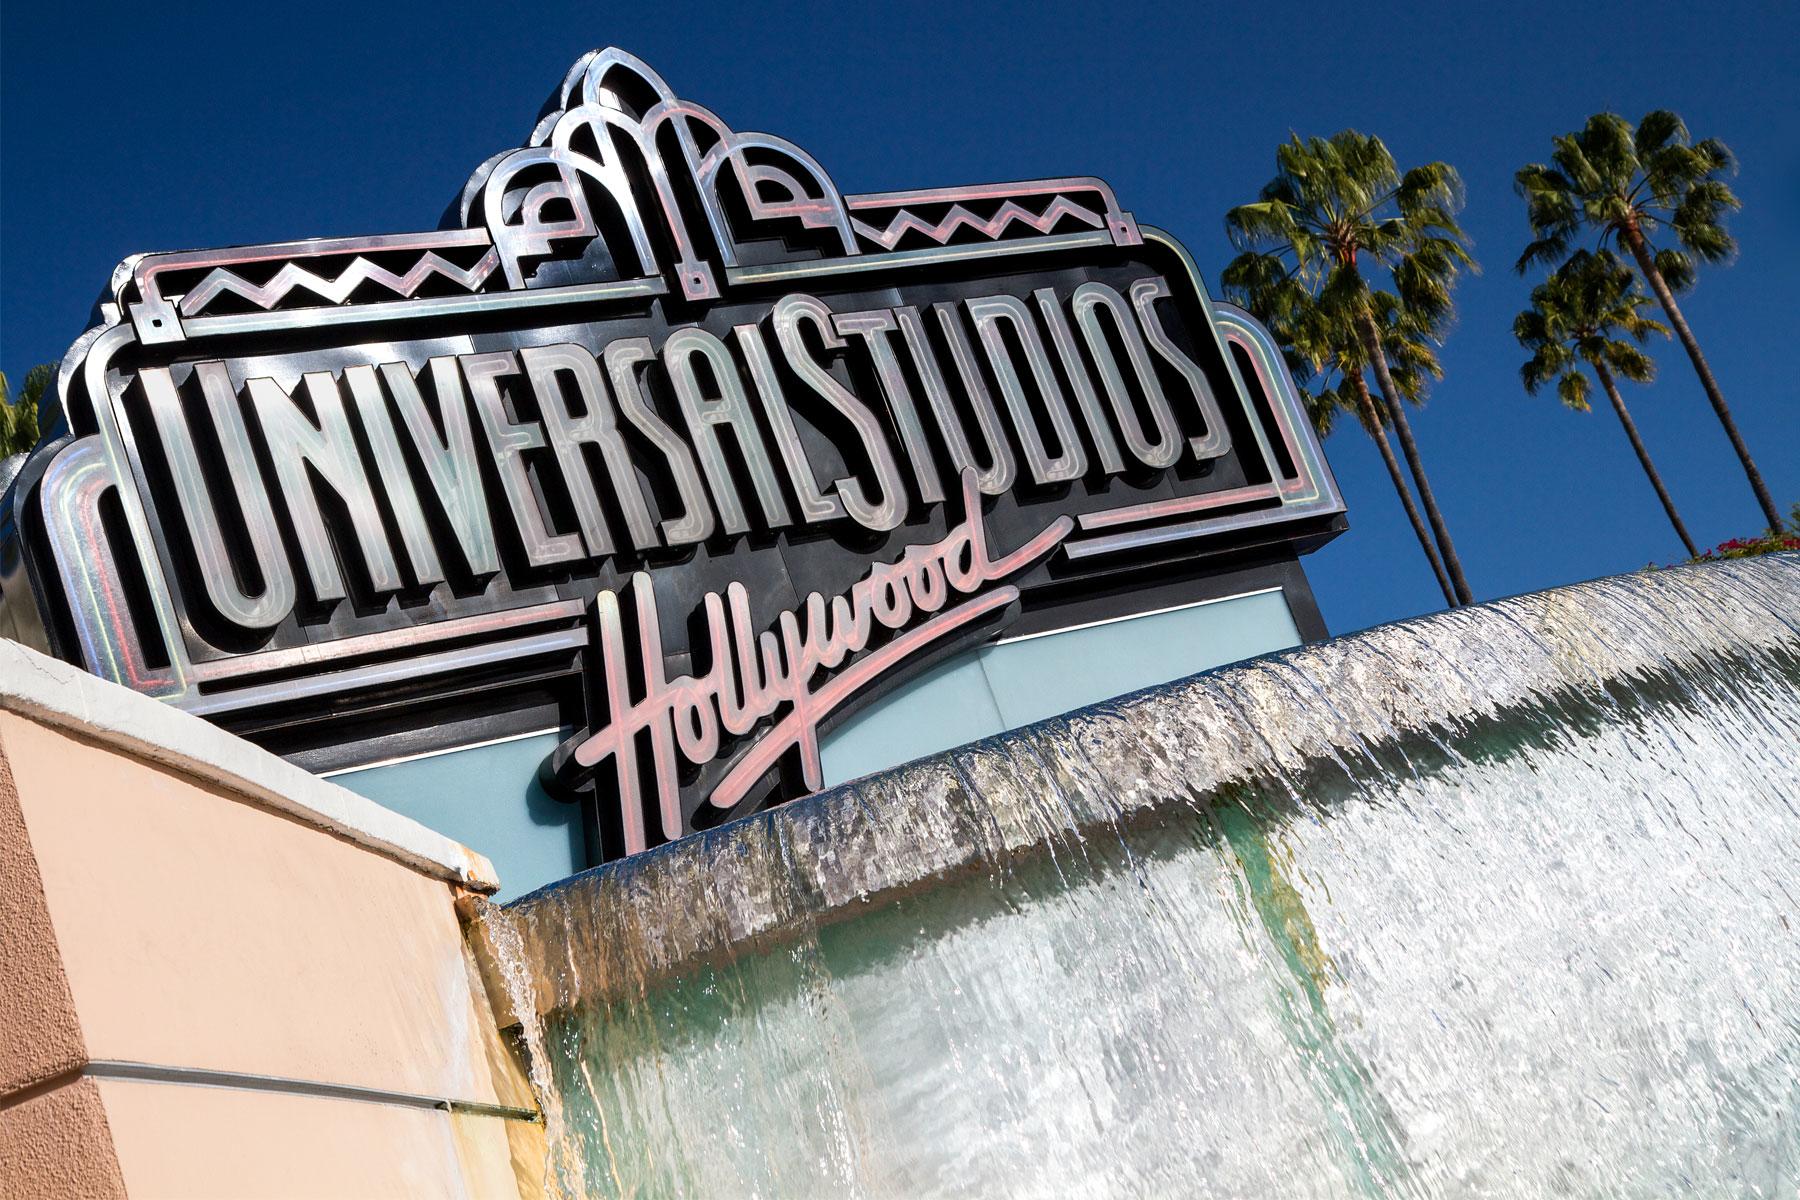 These Are the Best Rides at Universal Studios Hollywood